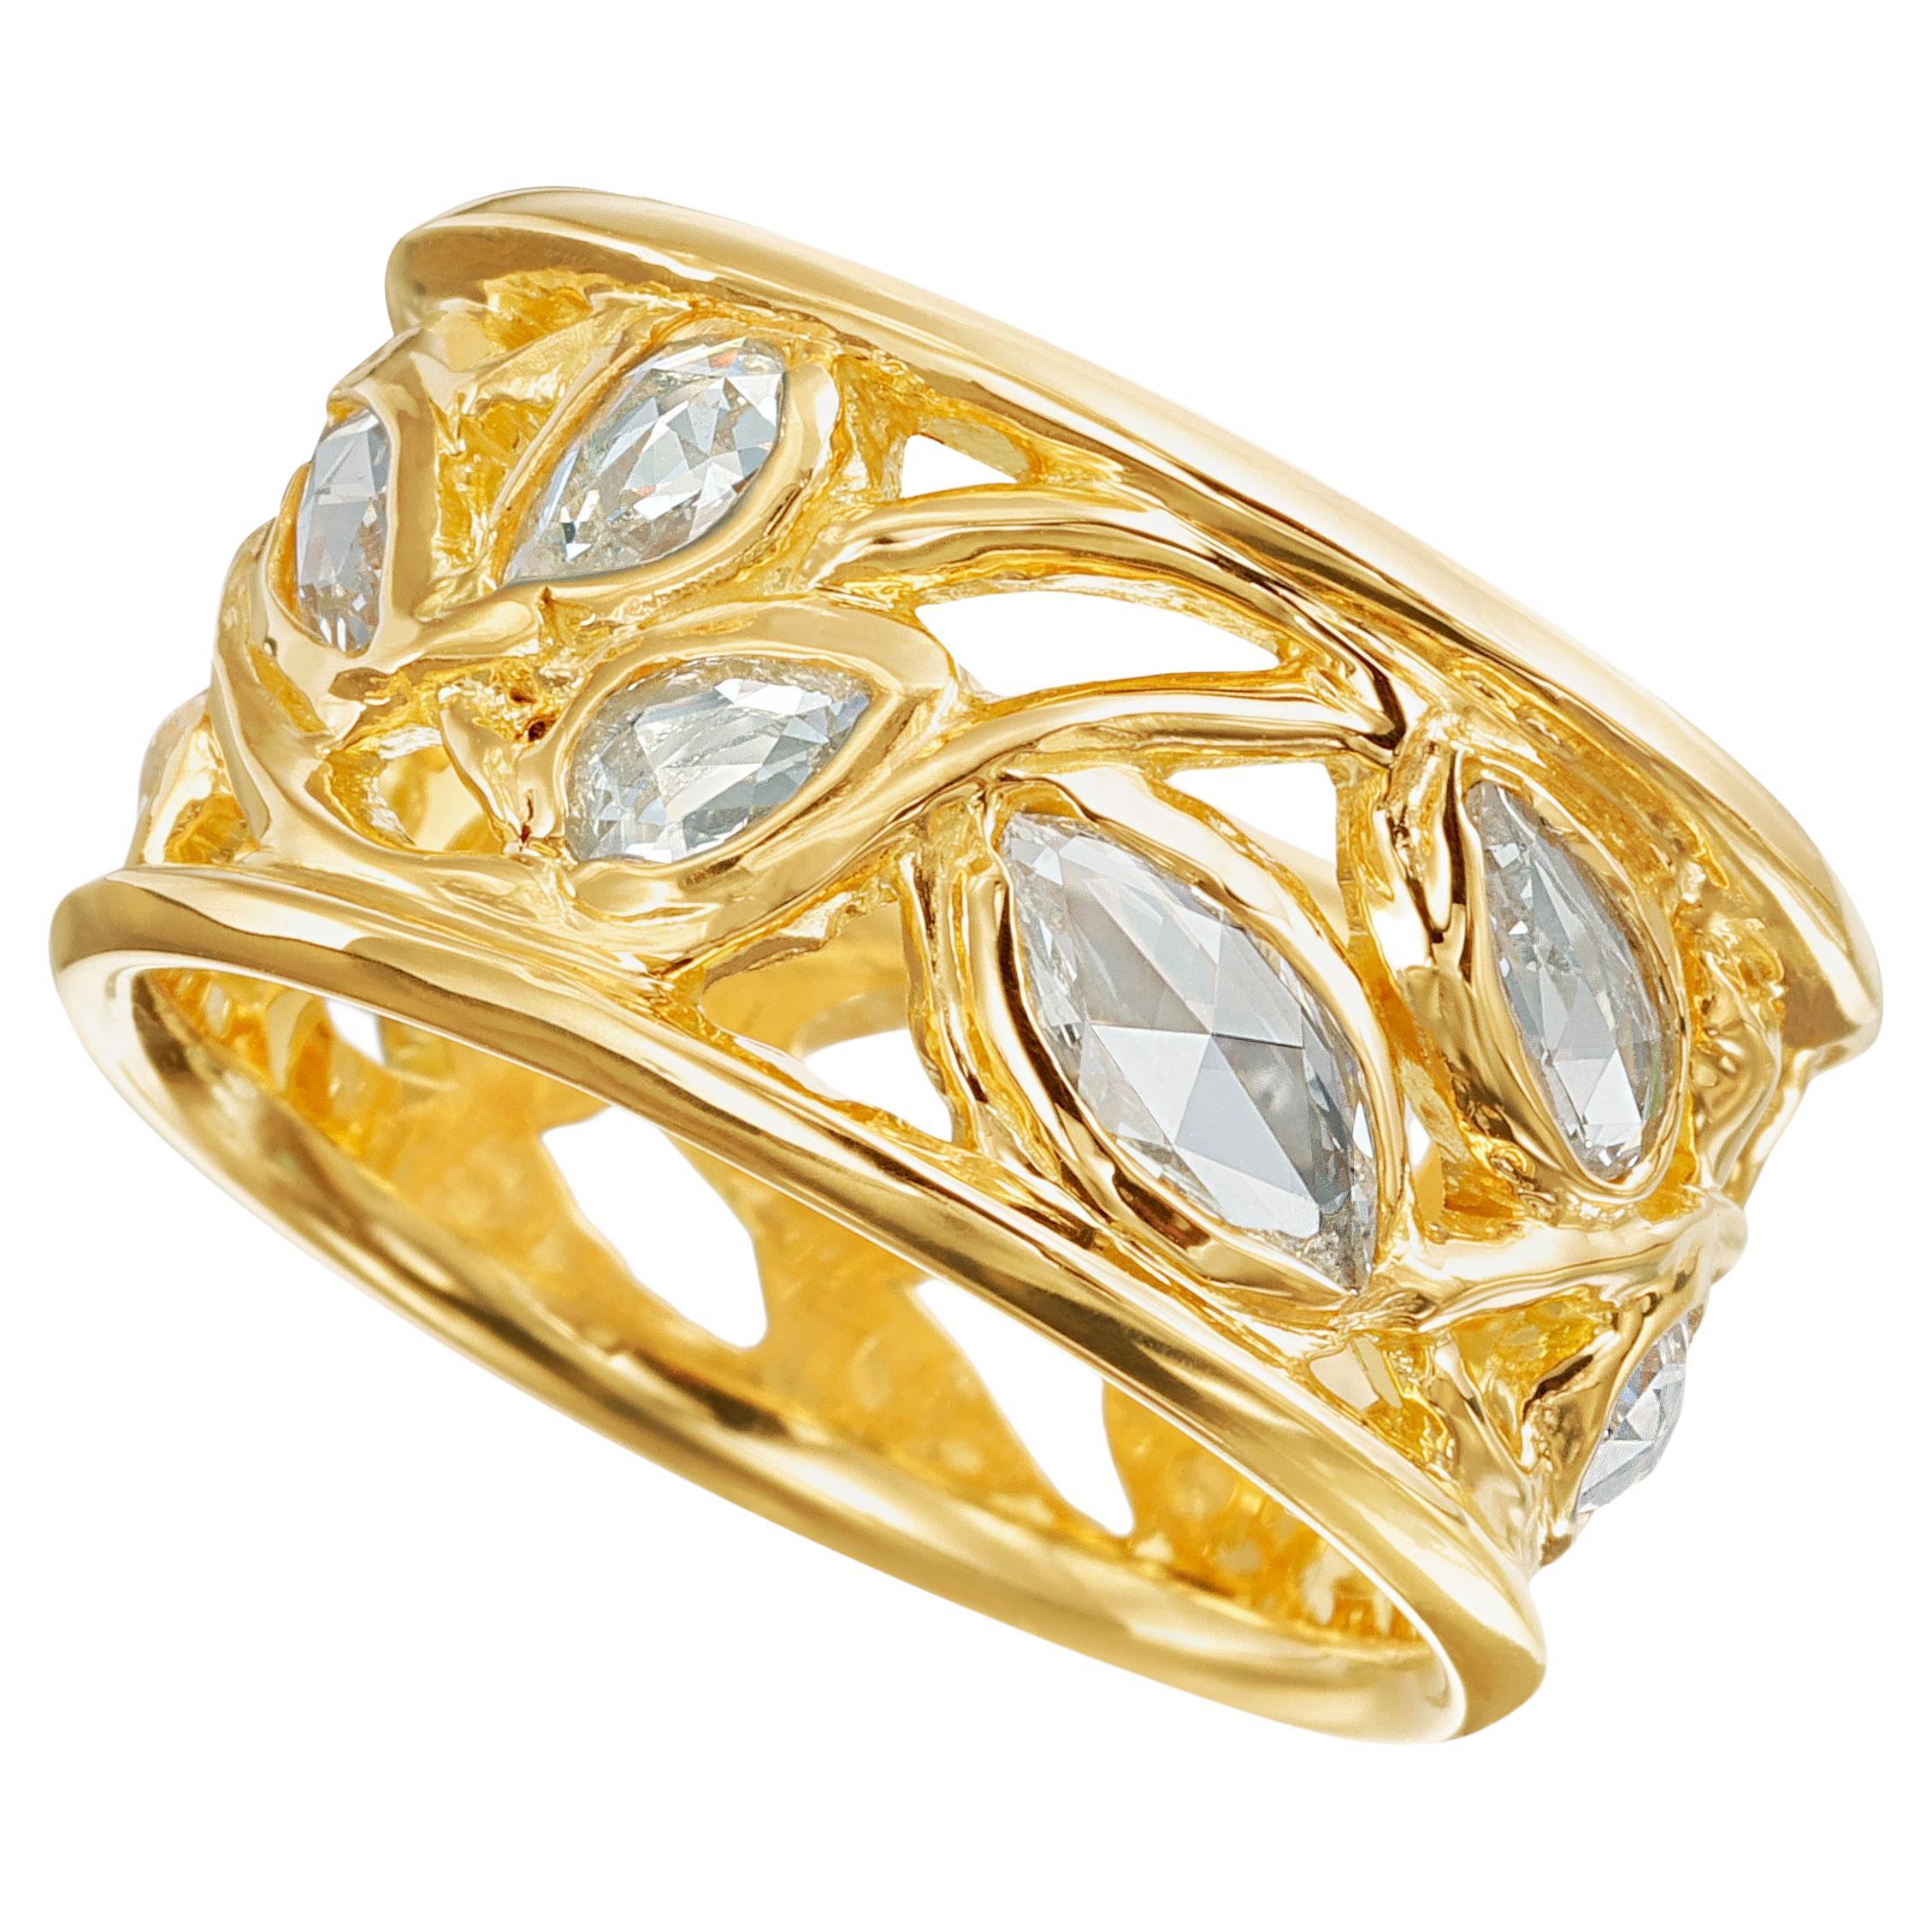 18kt Yellow Gold Organically Sculpted Wide Band Ring w/ White Rose Cut Diamonds